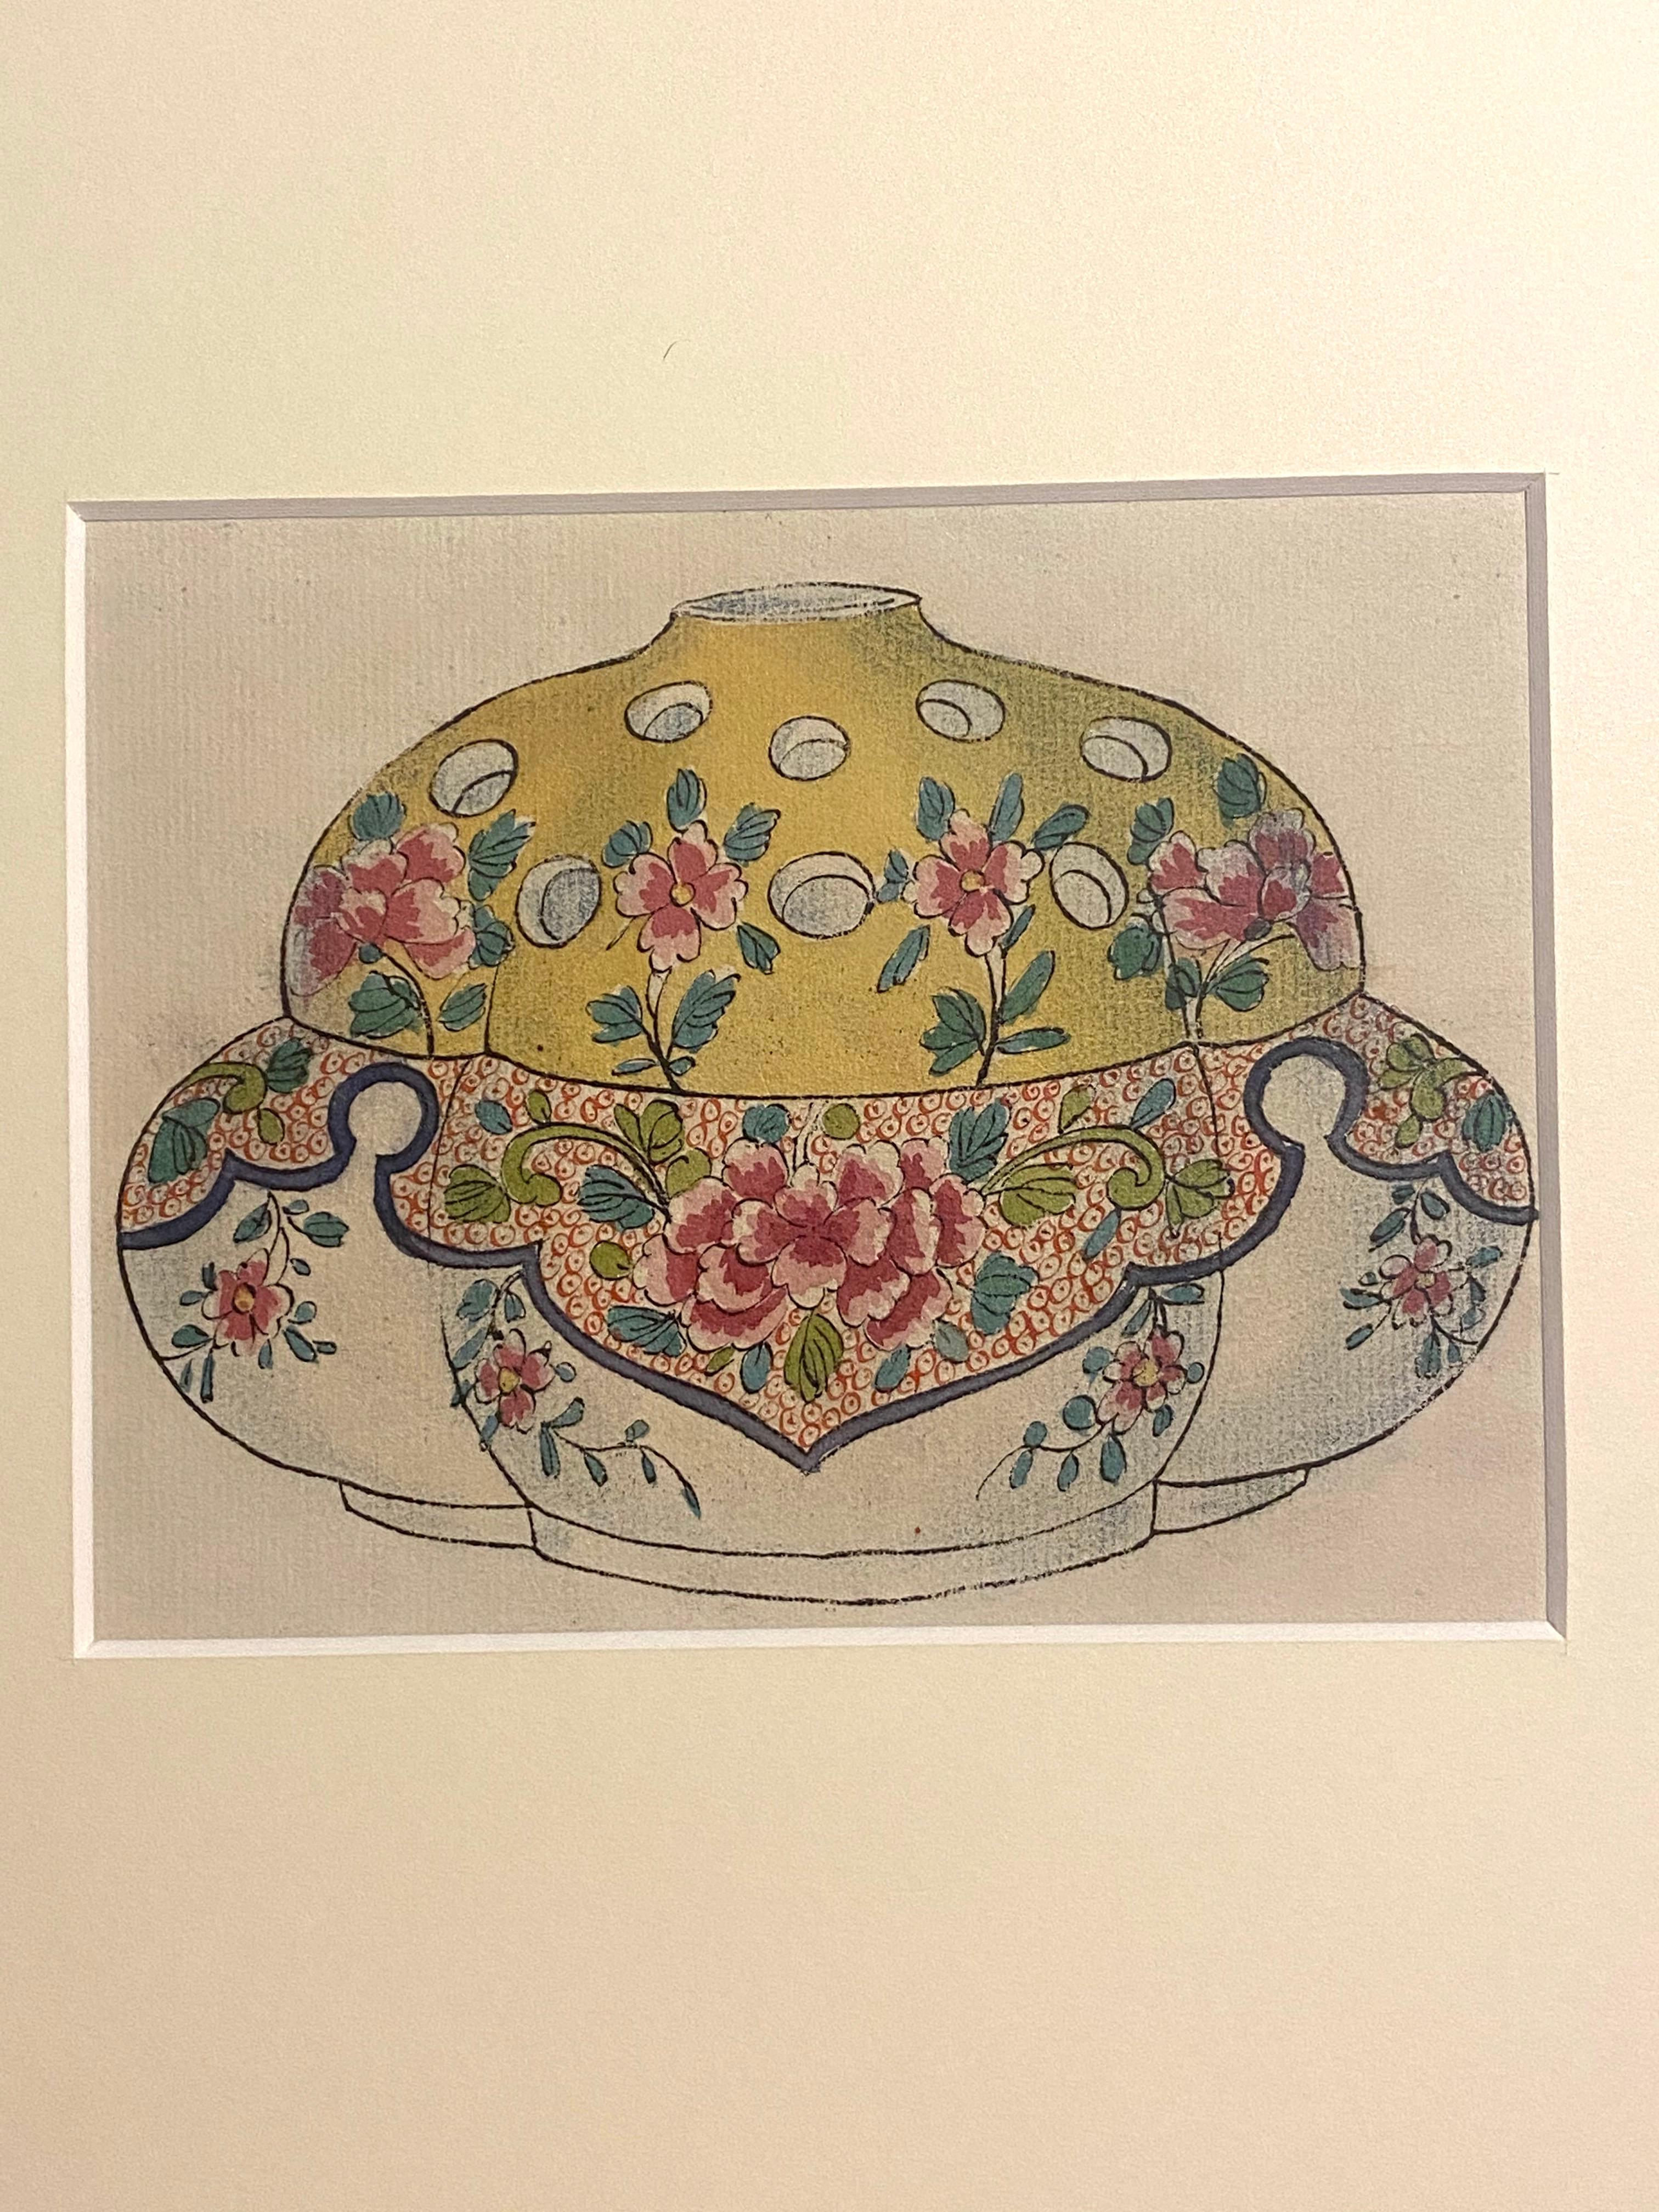 Porcelain Vase - Original China Ink and Watercolor - 1890s - Art by Unknown